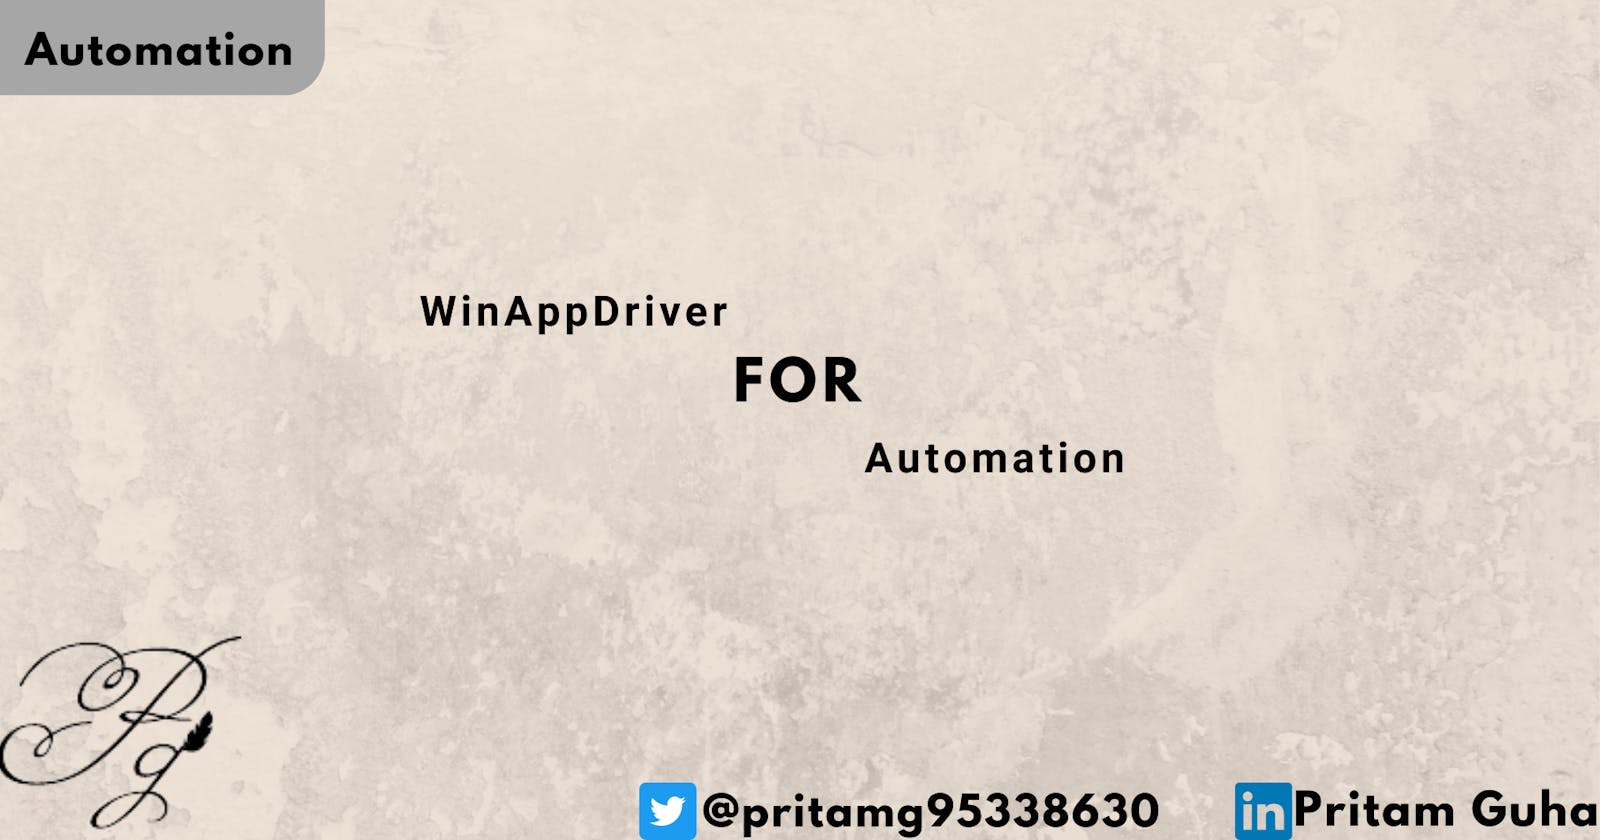 Knowing about WinAppDriver....